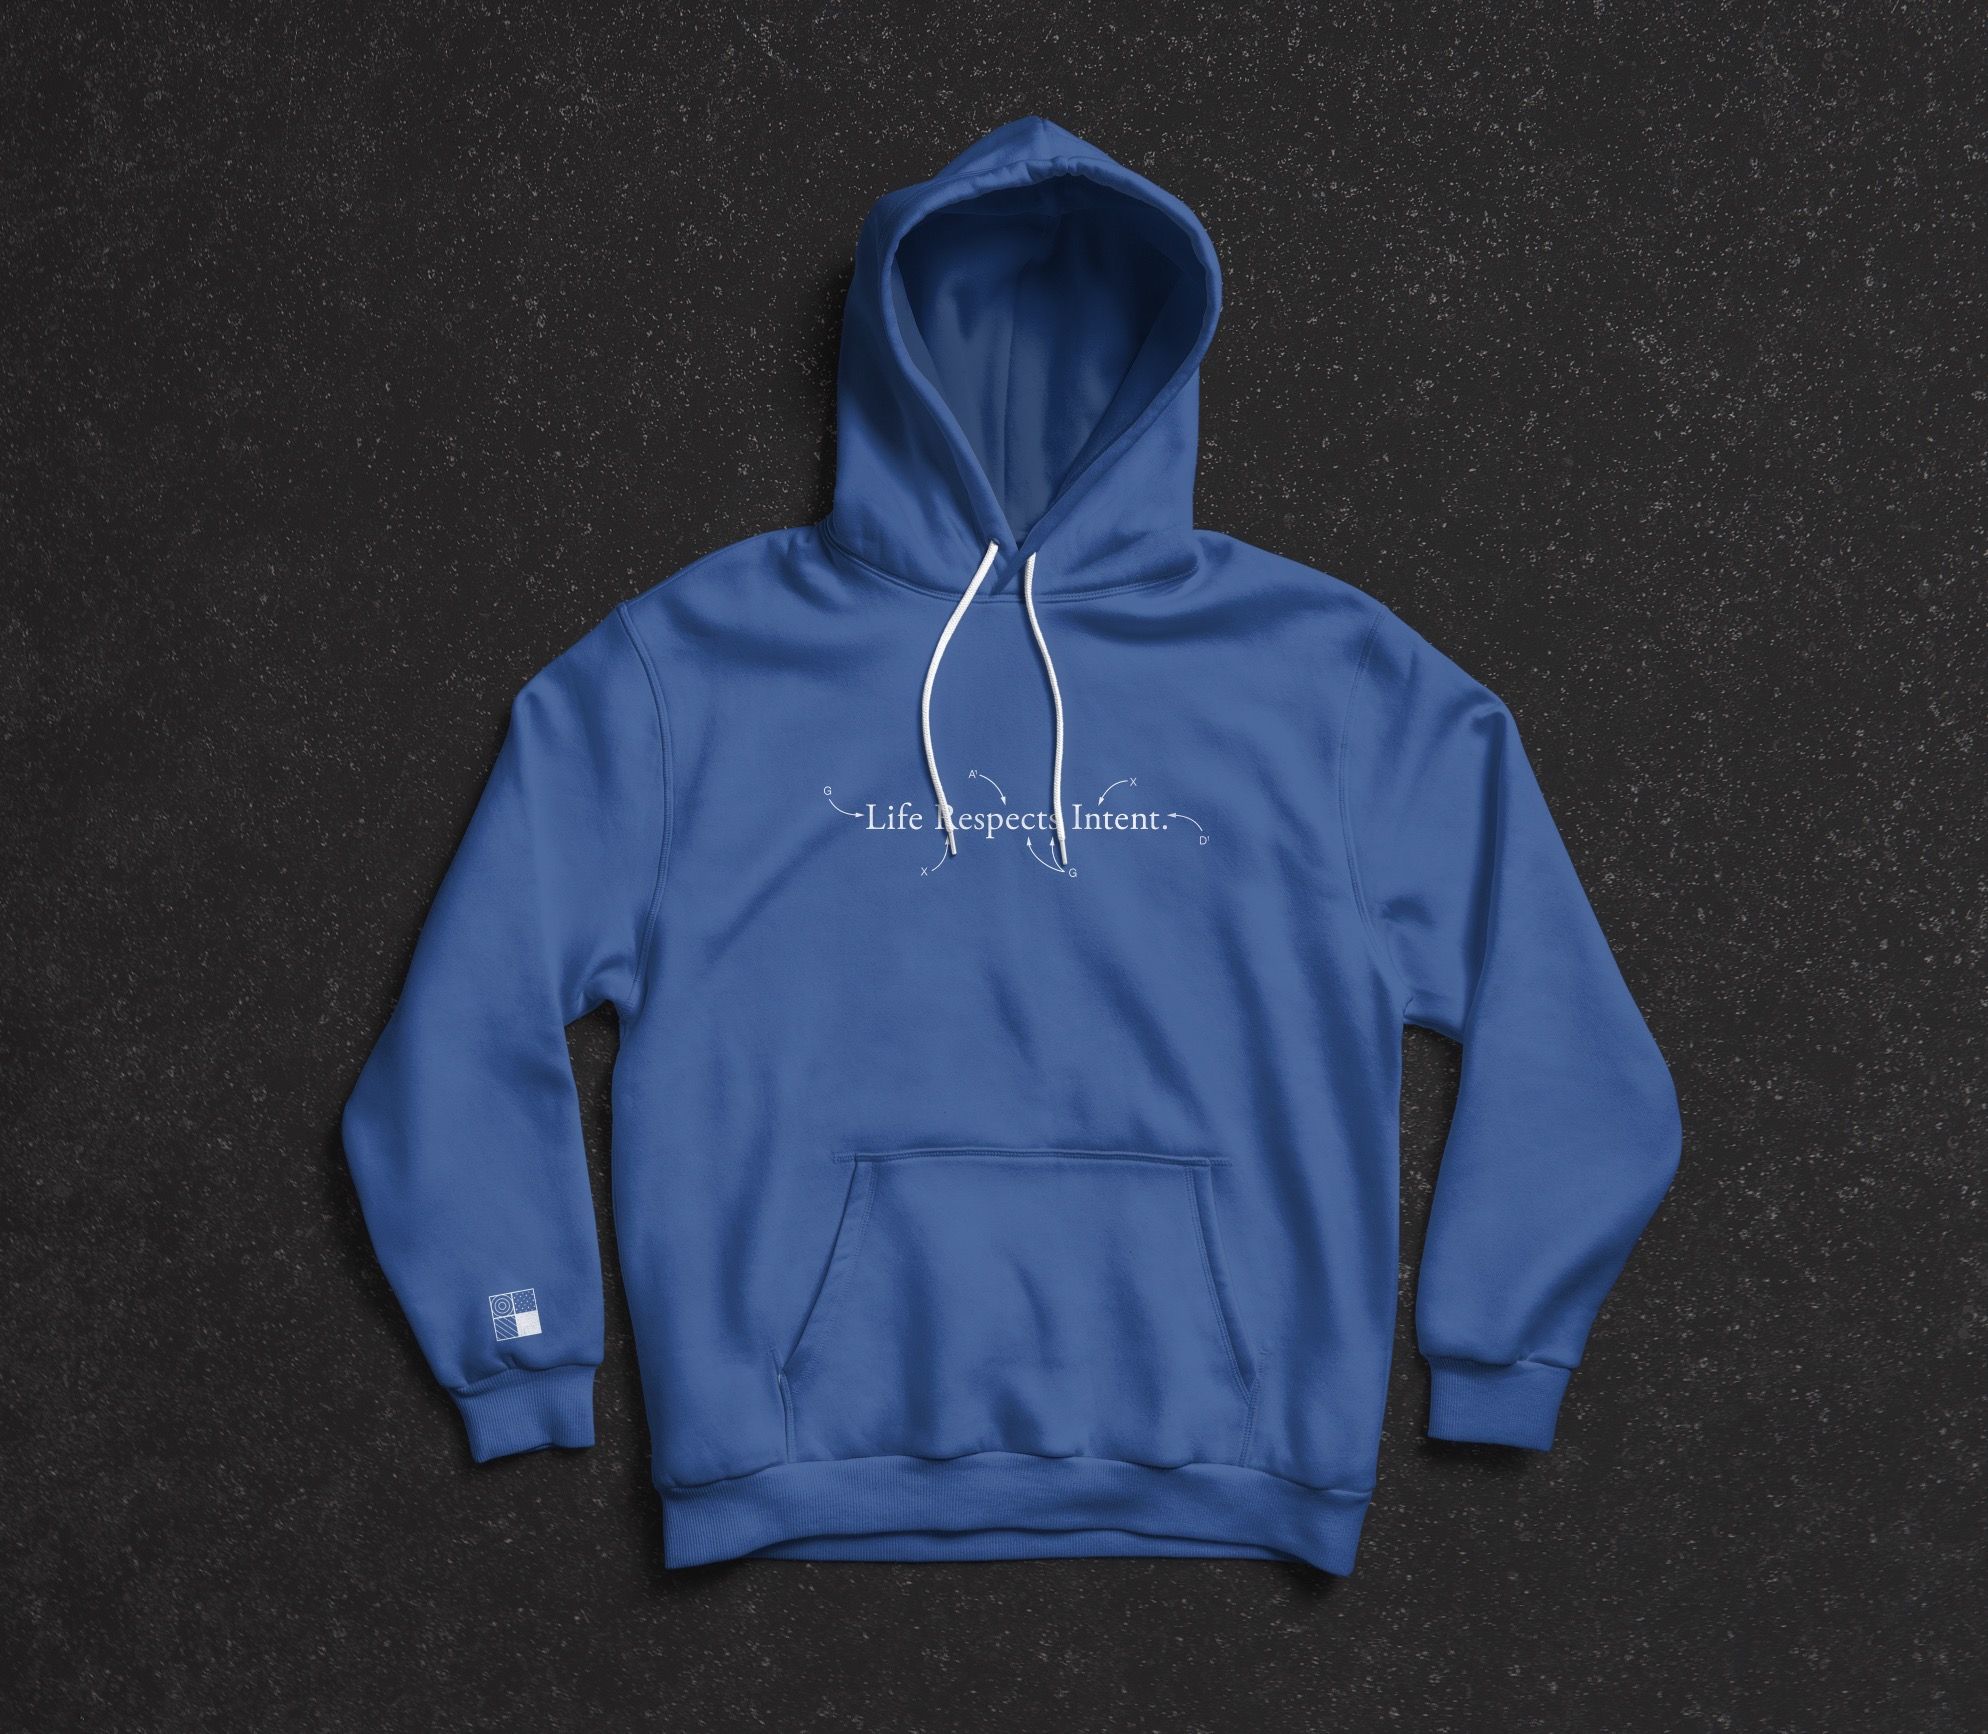 How We Intended Hoodies ON SALE NOW (passcode for exclusives inside)